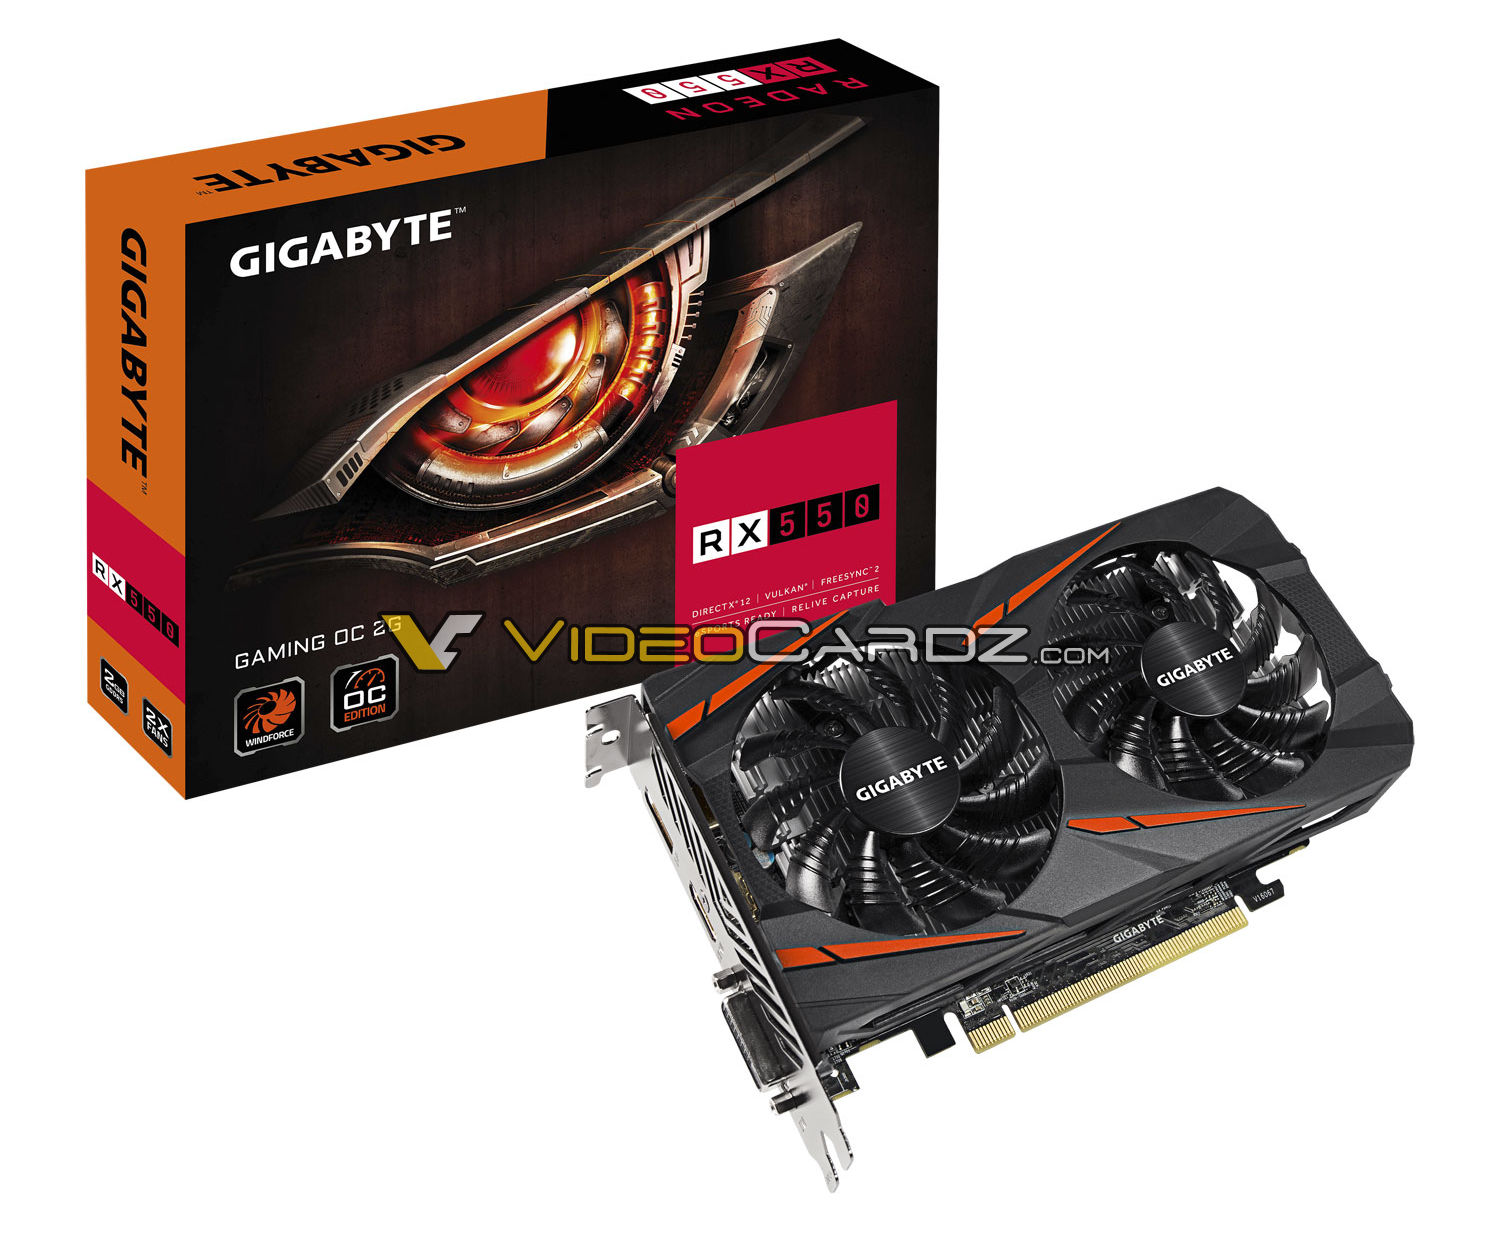 Media asset in full size related to 3dfxzone.it news item entitled as follows: Fotogallery di 9 video card GIGABYTE Radeon RX 500 AORUS e GAMING | Image Name: news26126_GIGABYTE-AORUS-Radeon-RX-500_8.jpg